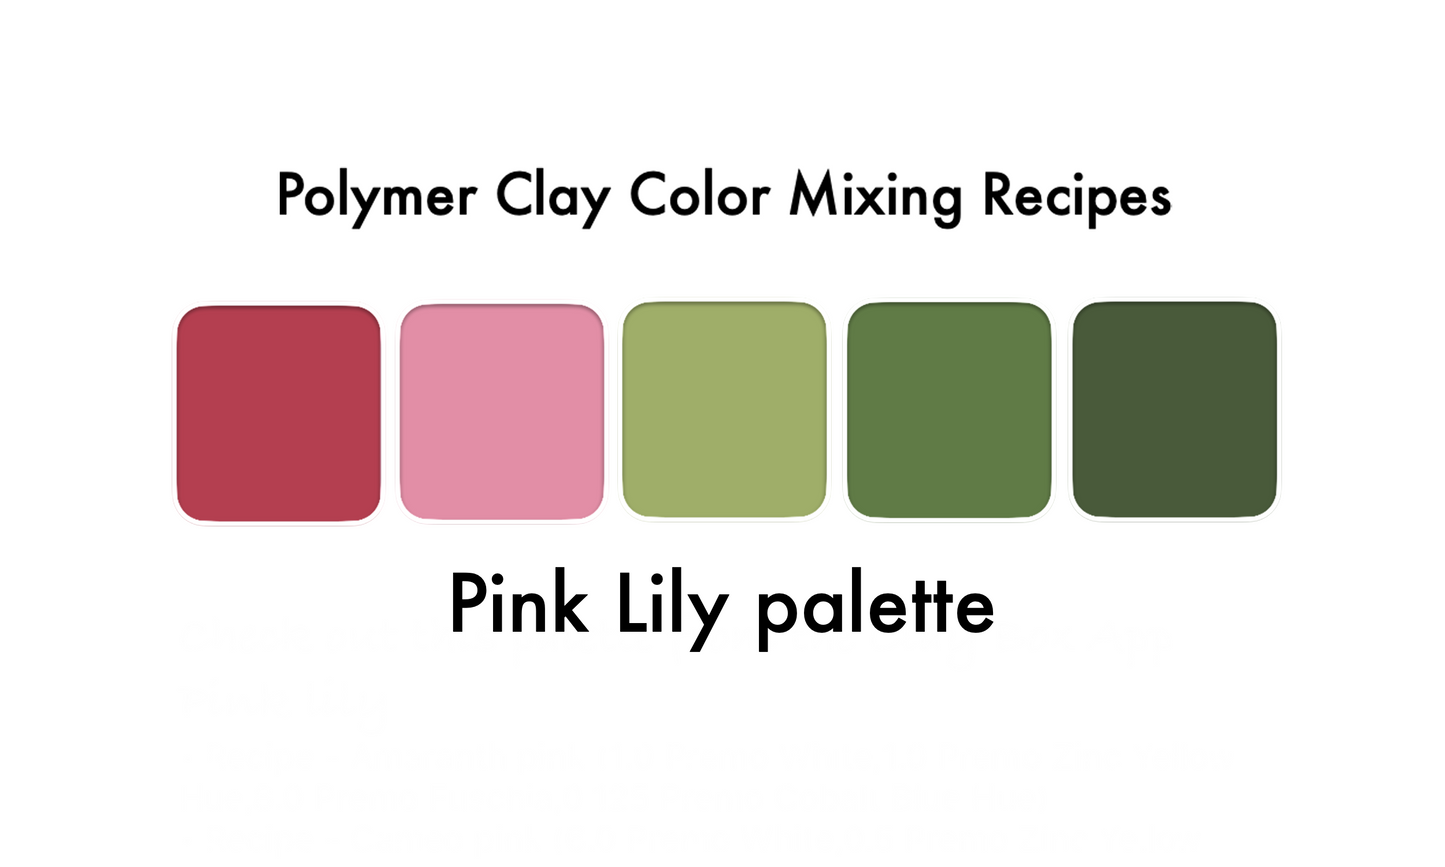 Pink Lily palette - color recipes for Premo polymer clay